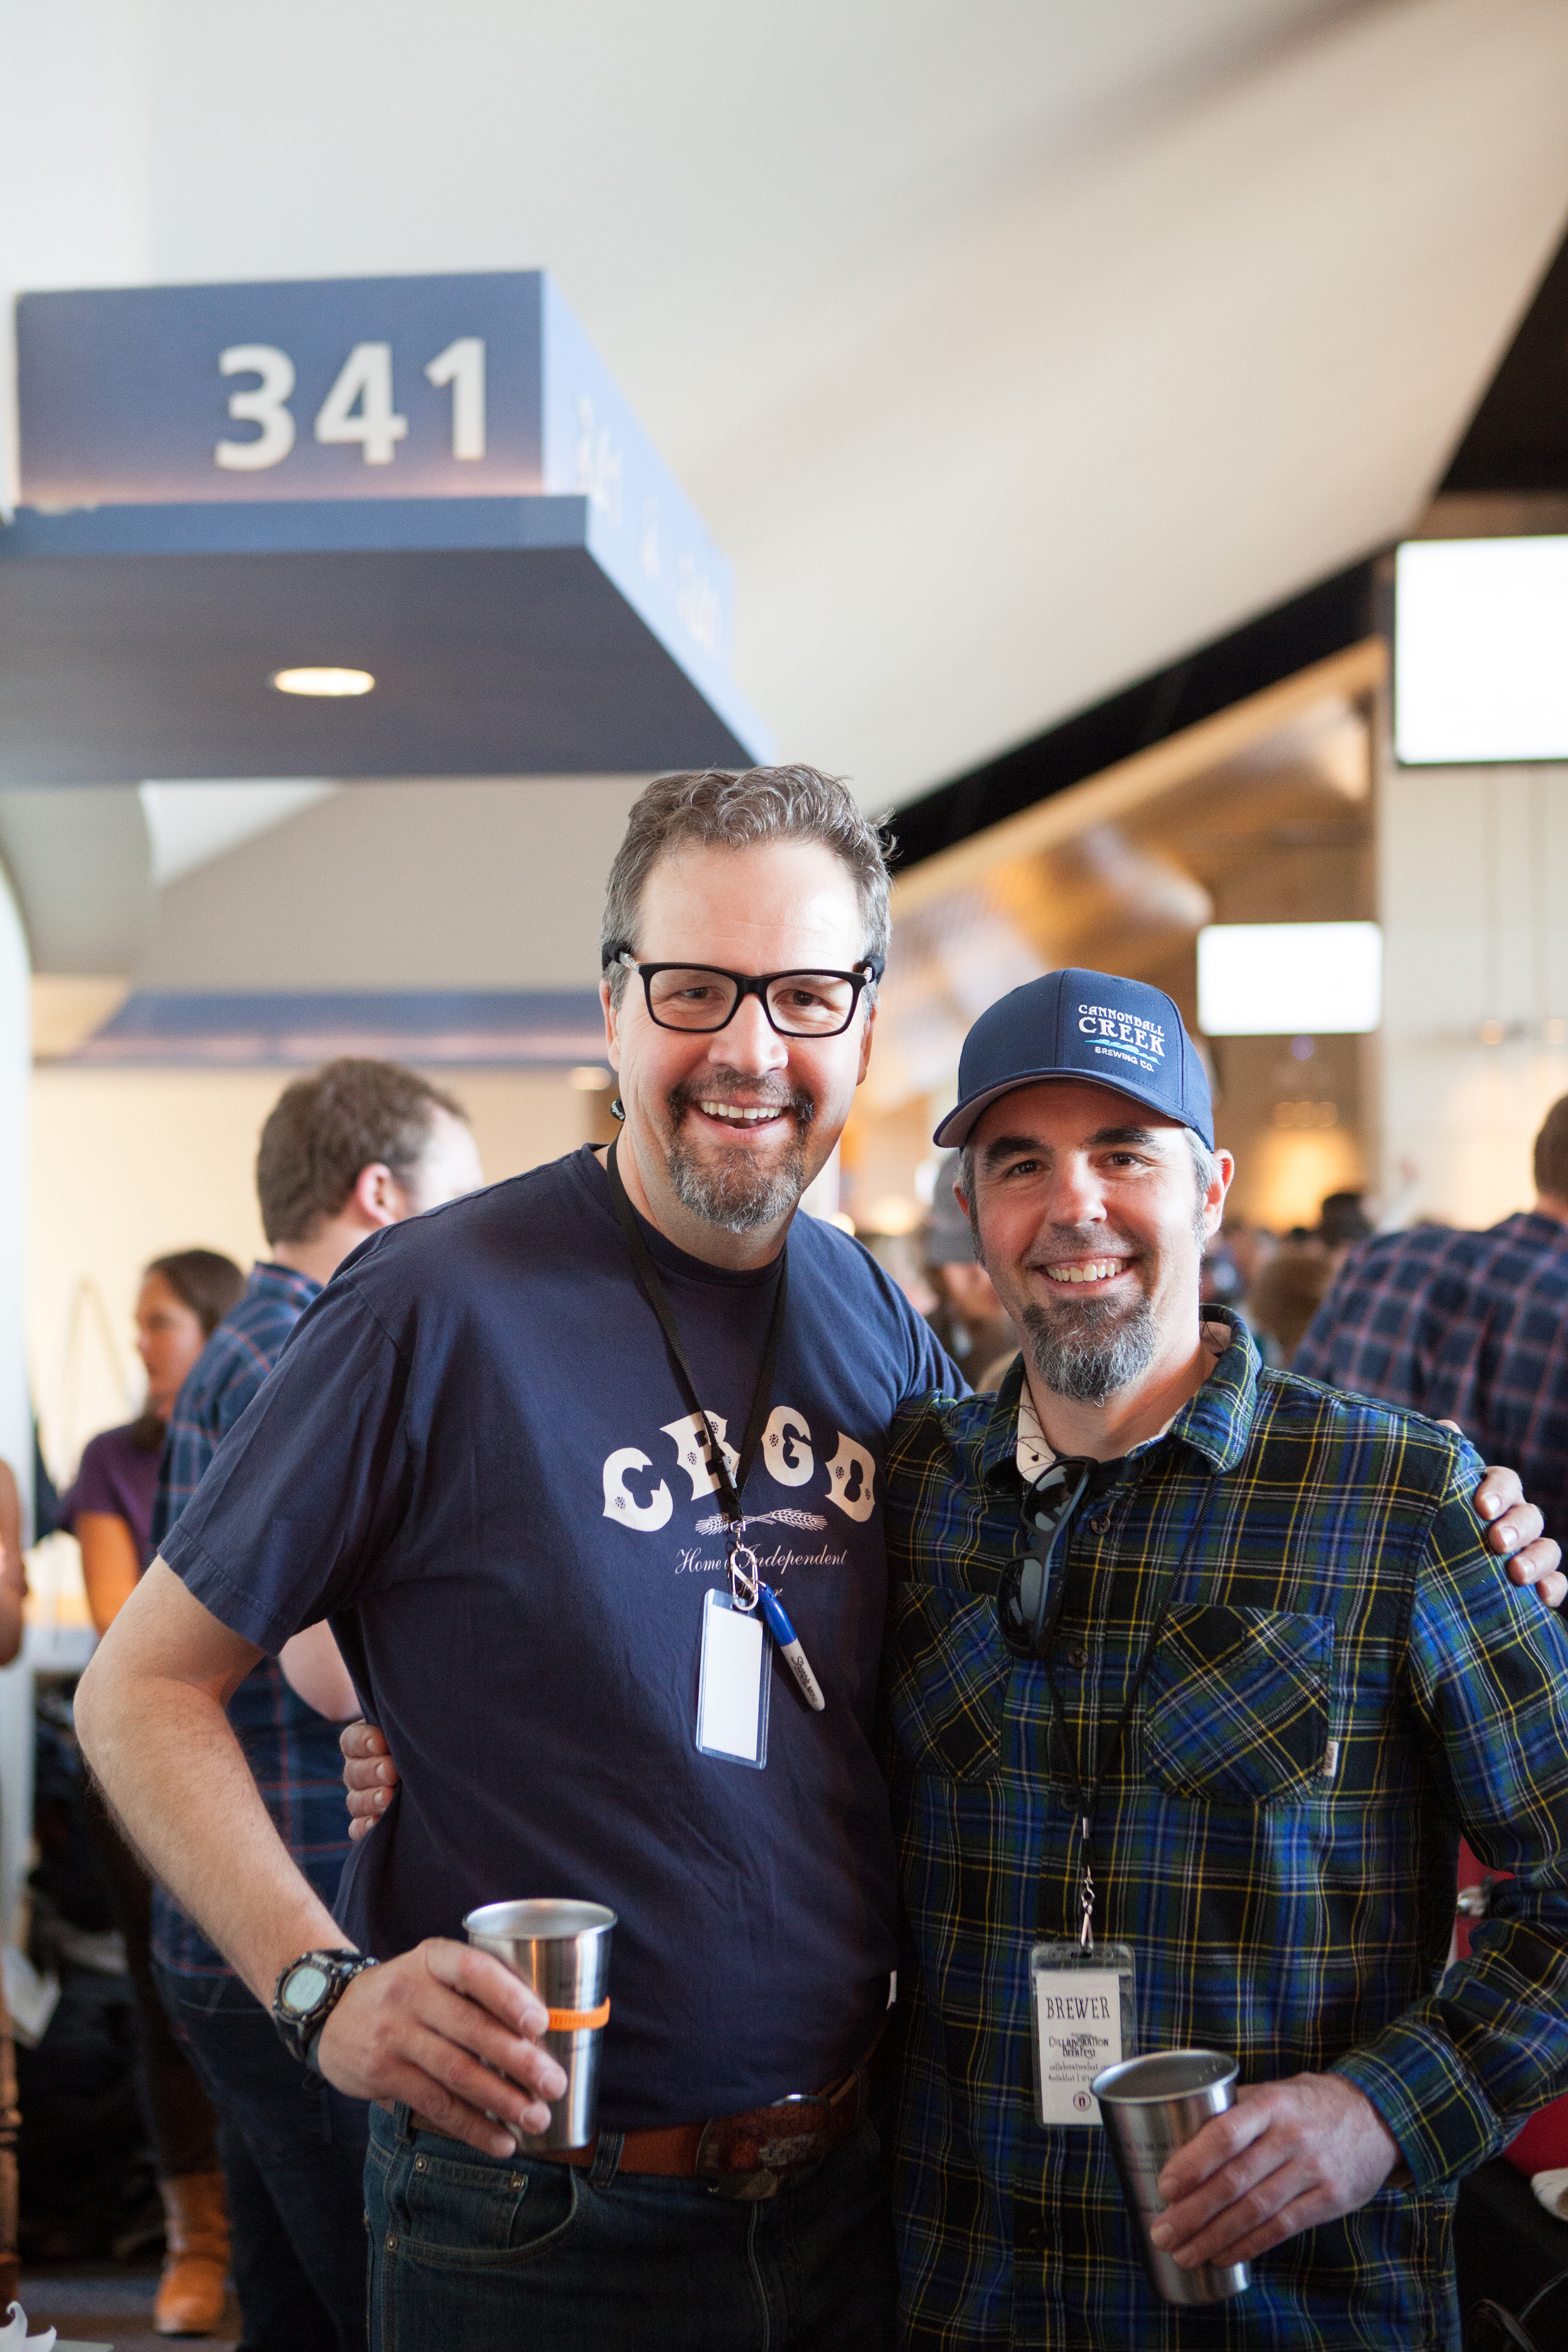   John Carlson, executive director of the Colorado Brewers Guild, and Brian Hutchinson, co-owner of Cannonball Creek Brewing Company in Golden, are just some of the 2,200 guests that attended the festival at Sports Authority Field at Mile High Stadiu